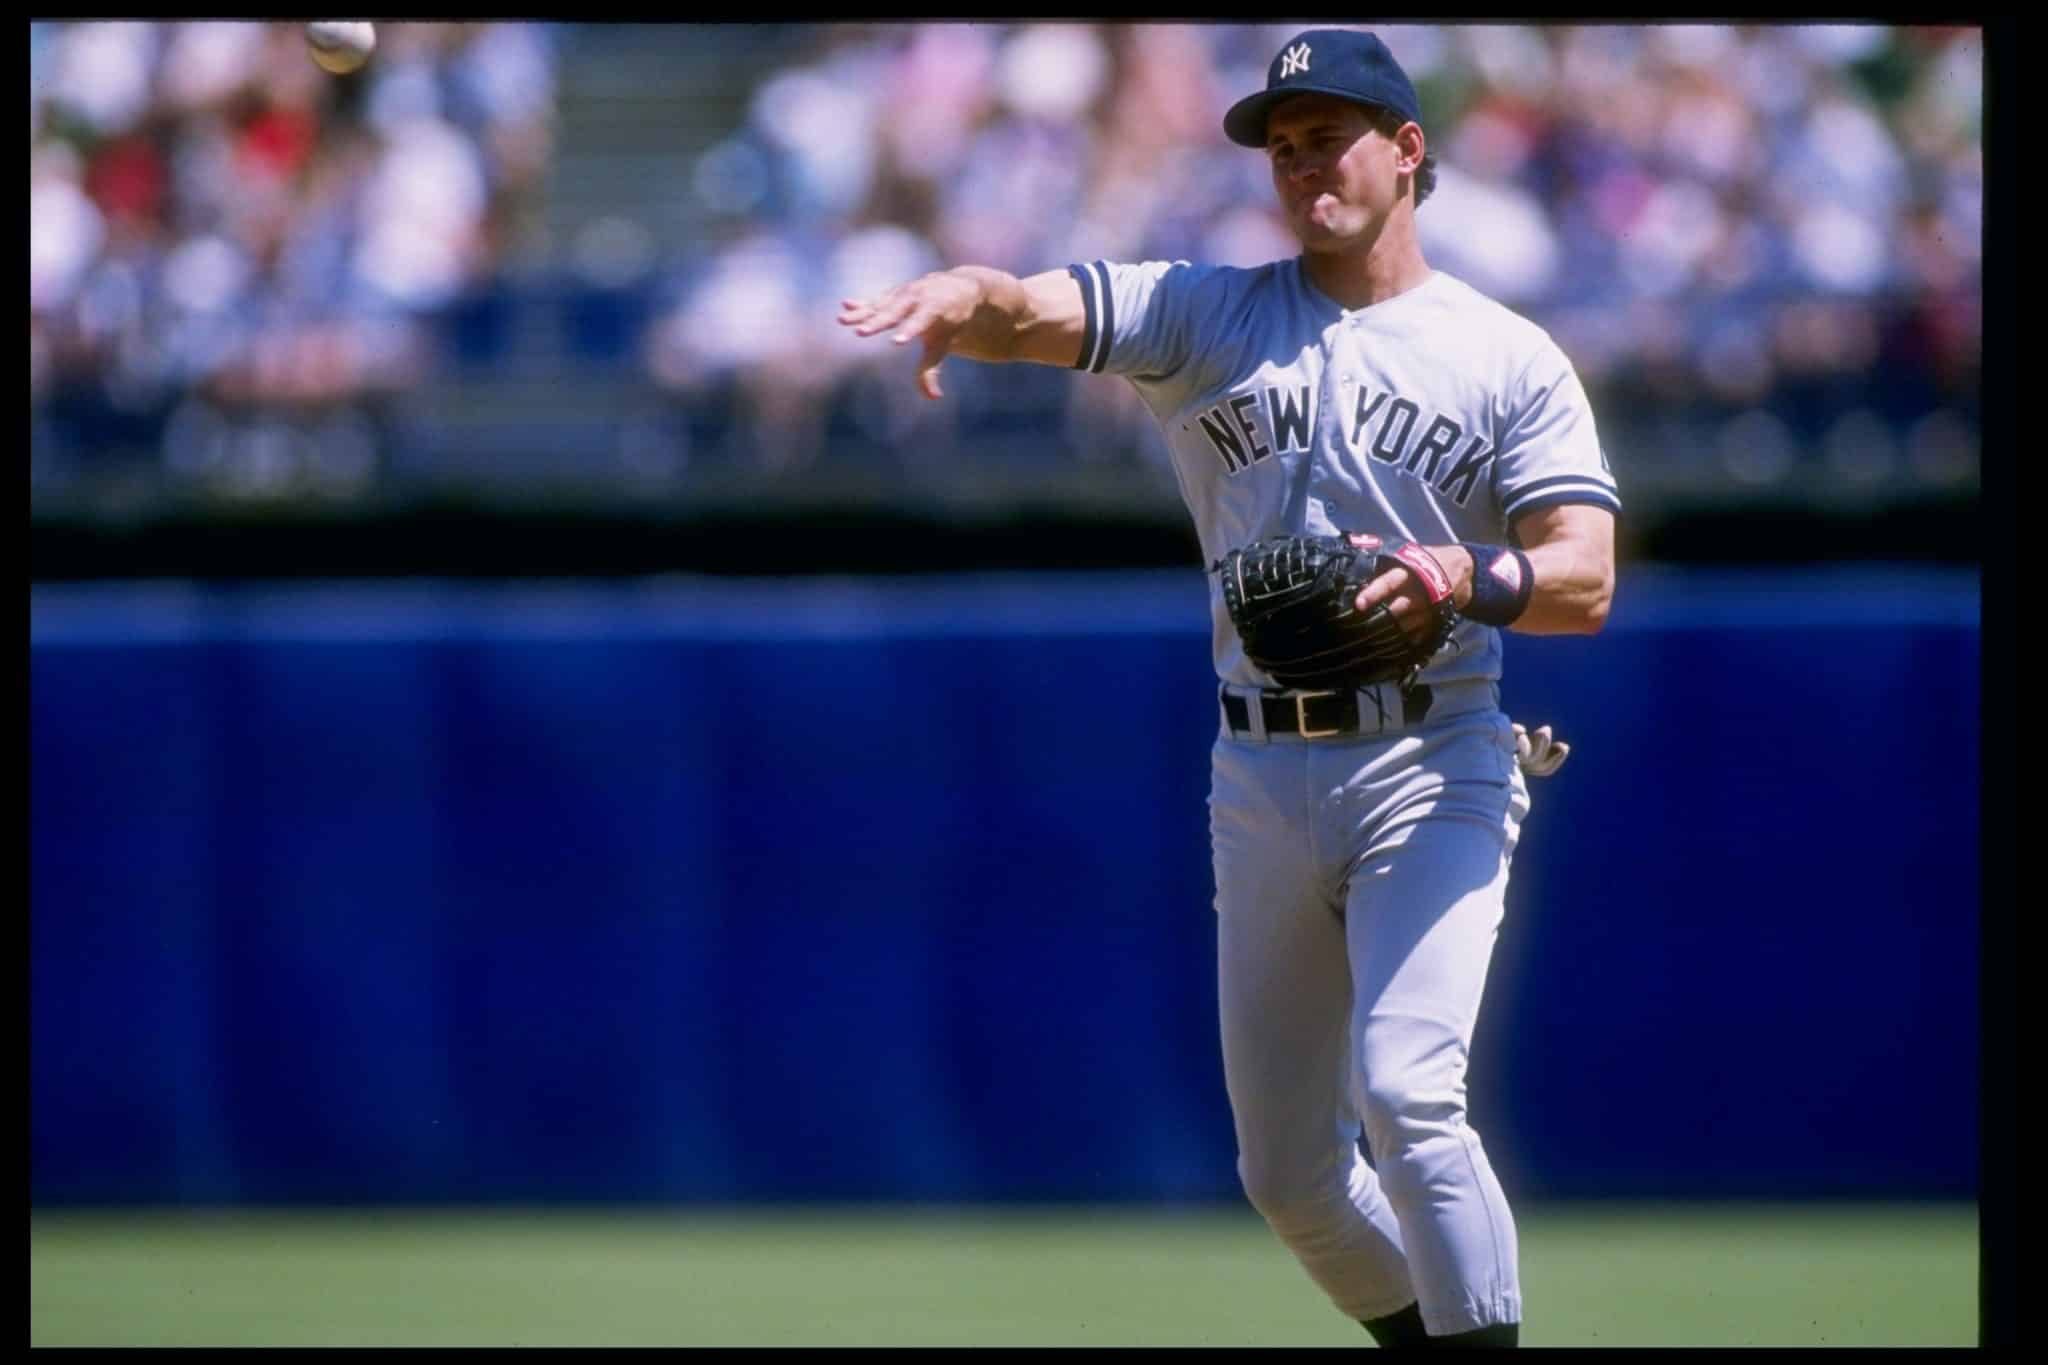 1990: Infielder Steve Sax of the New York Yankees in action during a game.